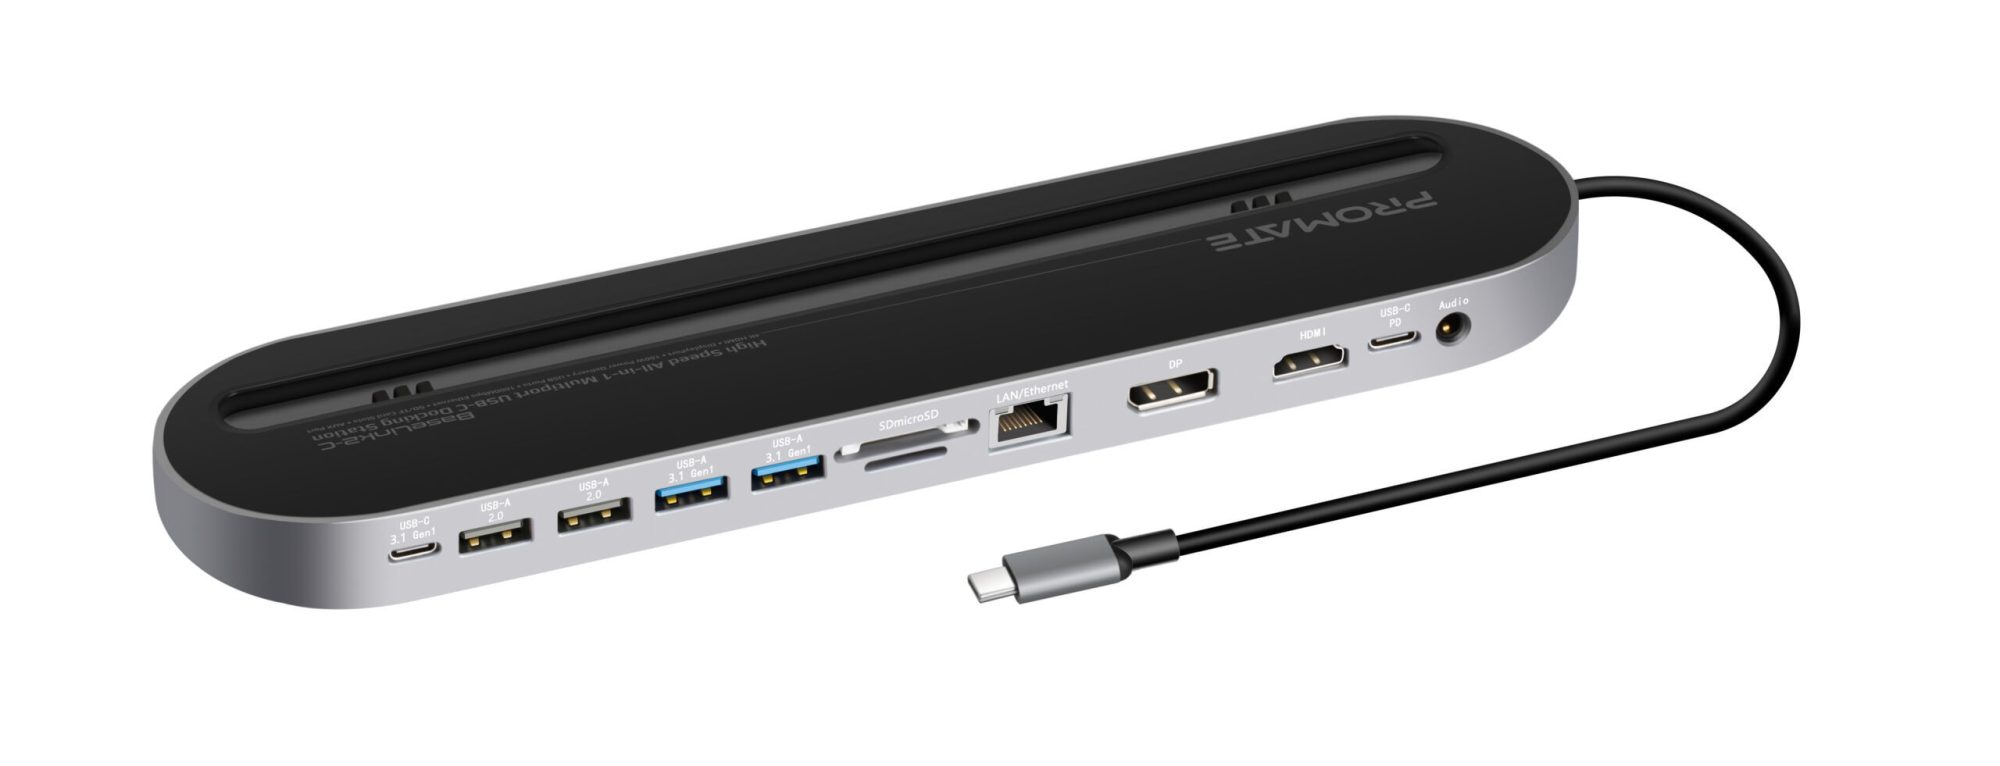 Promate USB-C Hub, 12-In-1 Type-C Adapter with 100W USB-C Power Delivery, 4K HDMI, Ethernet Port, TF/SD Card Slot, Type-C Data Port, 4 USB Port, Display Port, AUX and Built-In Tablet Stand, BaseLink2-C